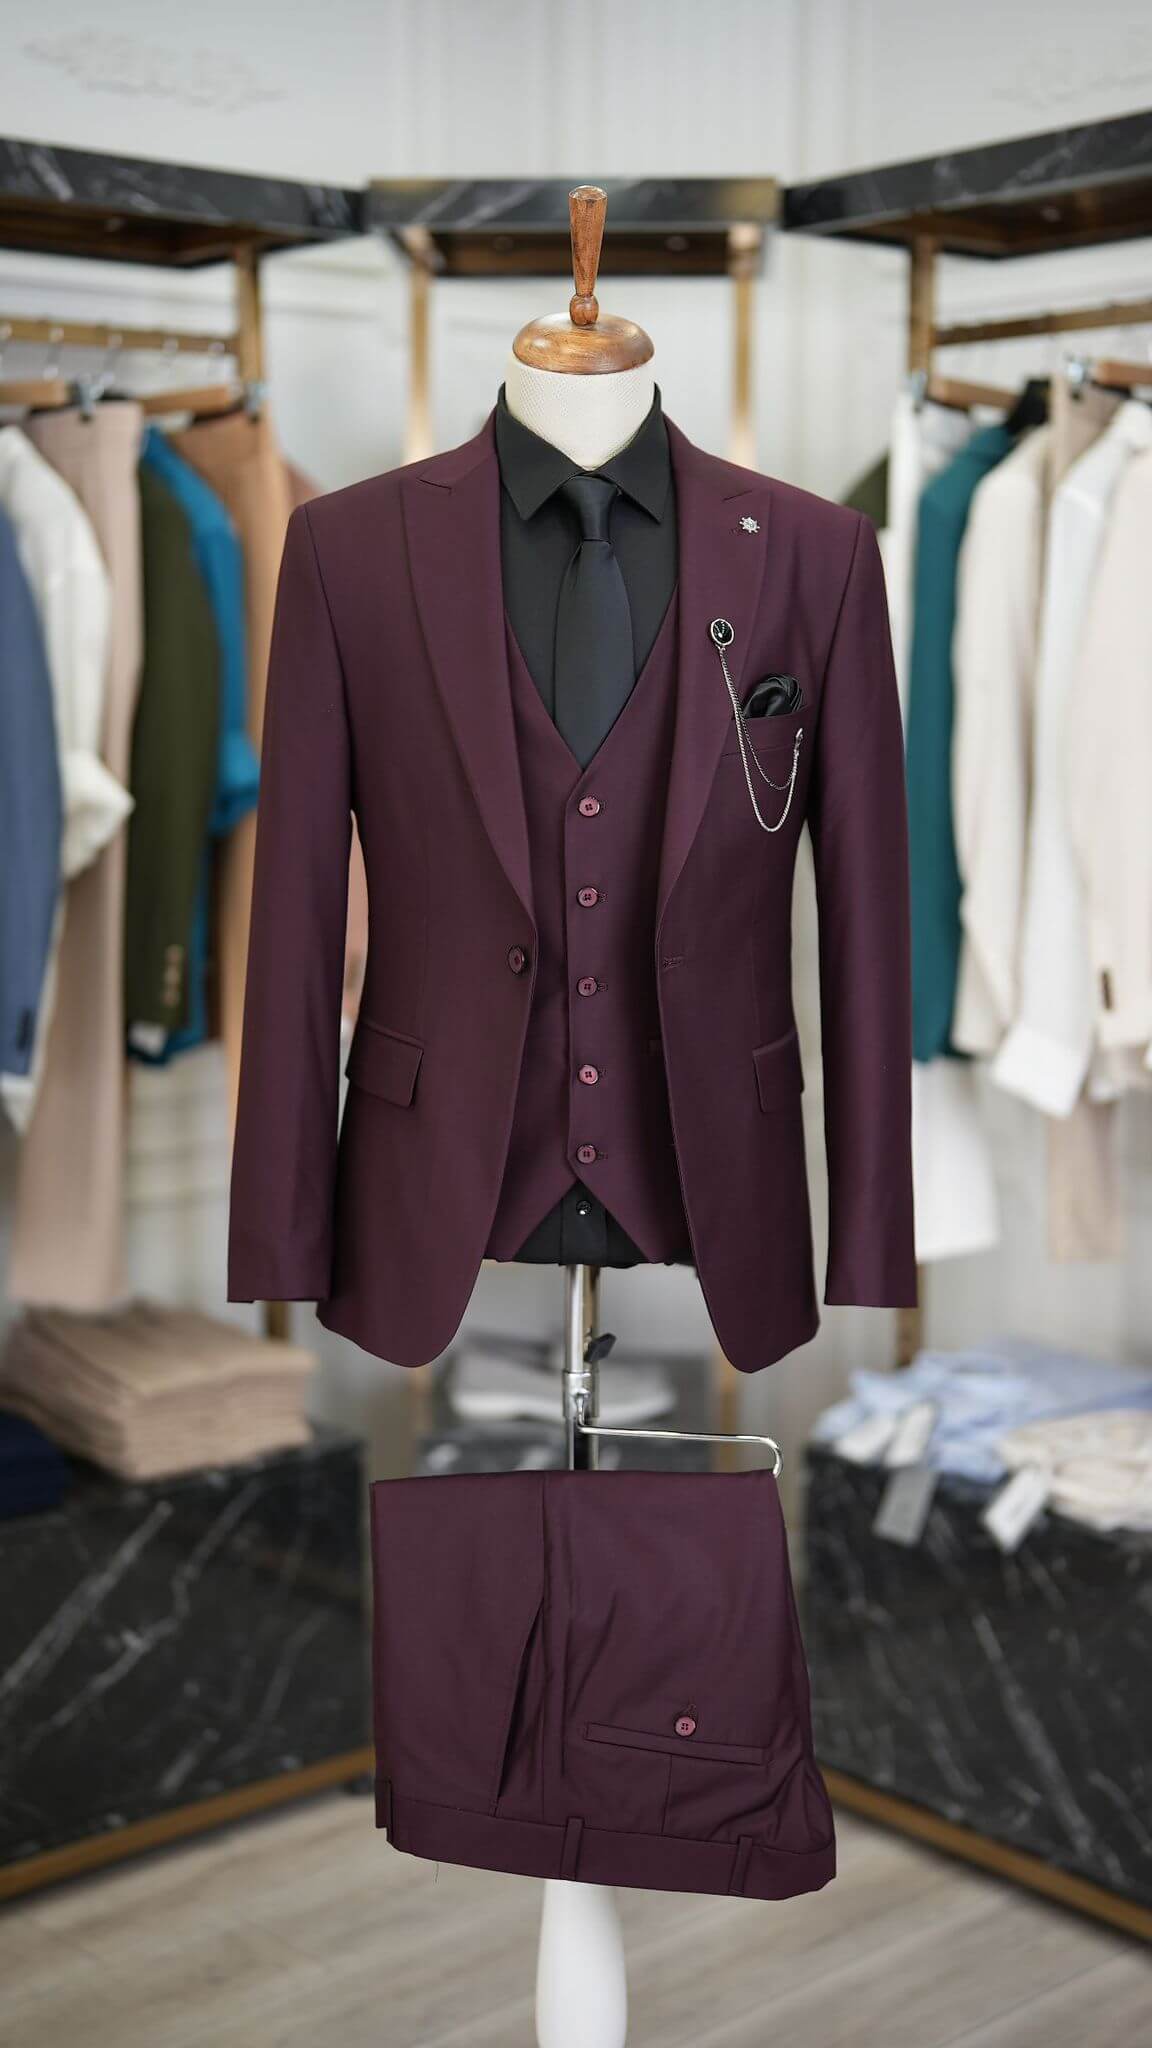 A Burgundy Suit on display. 